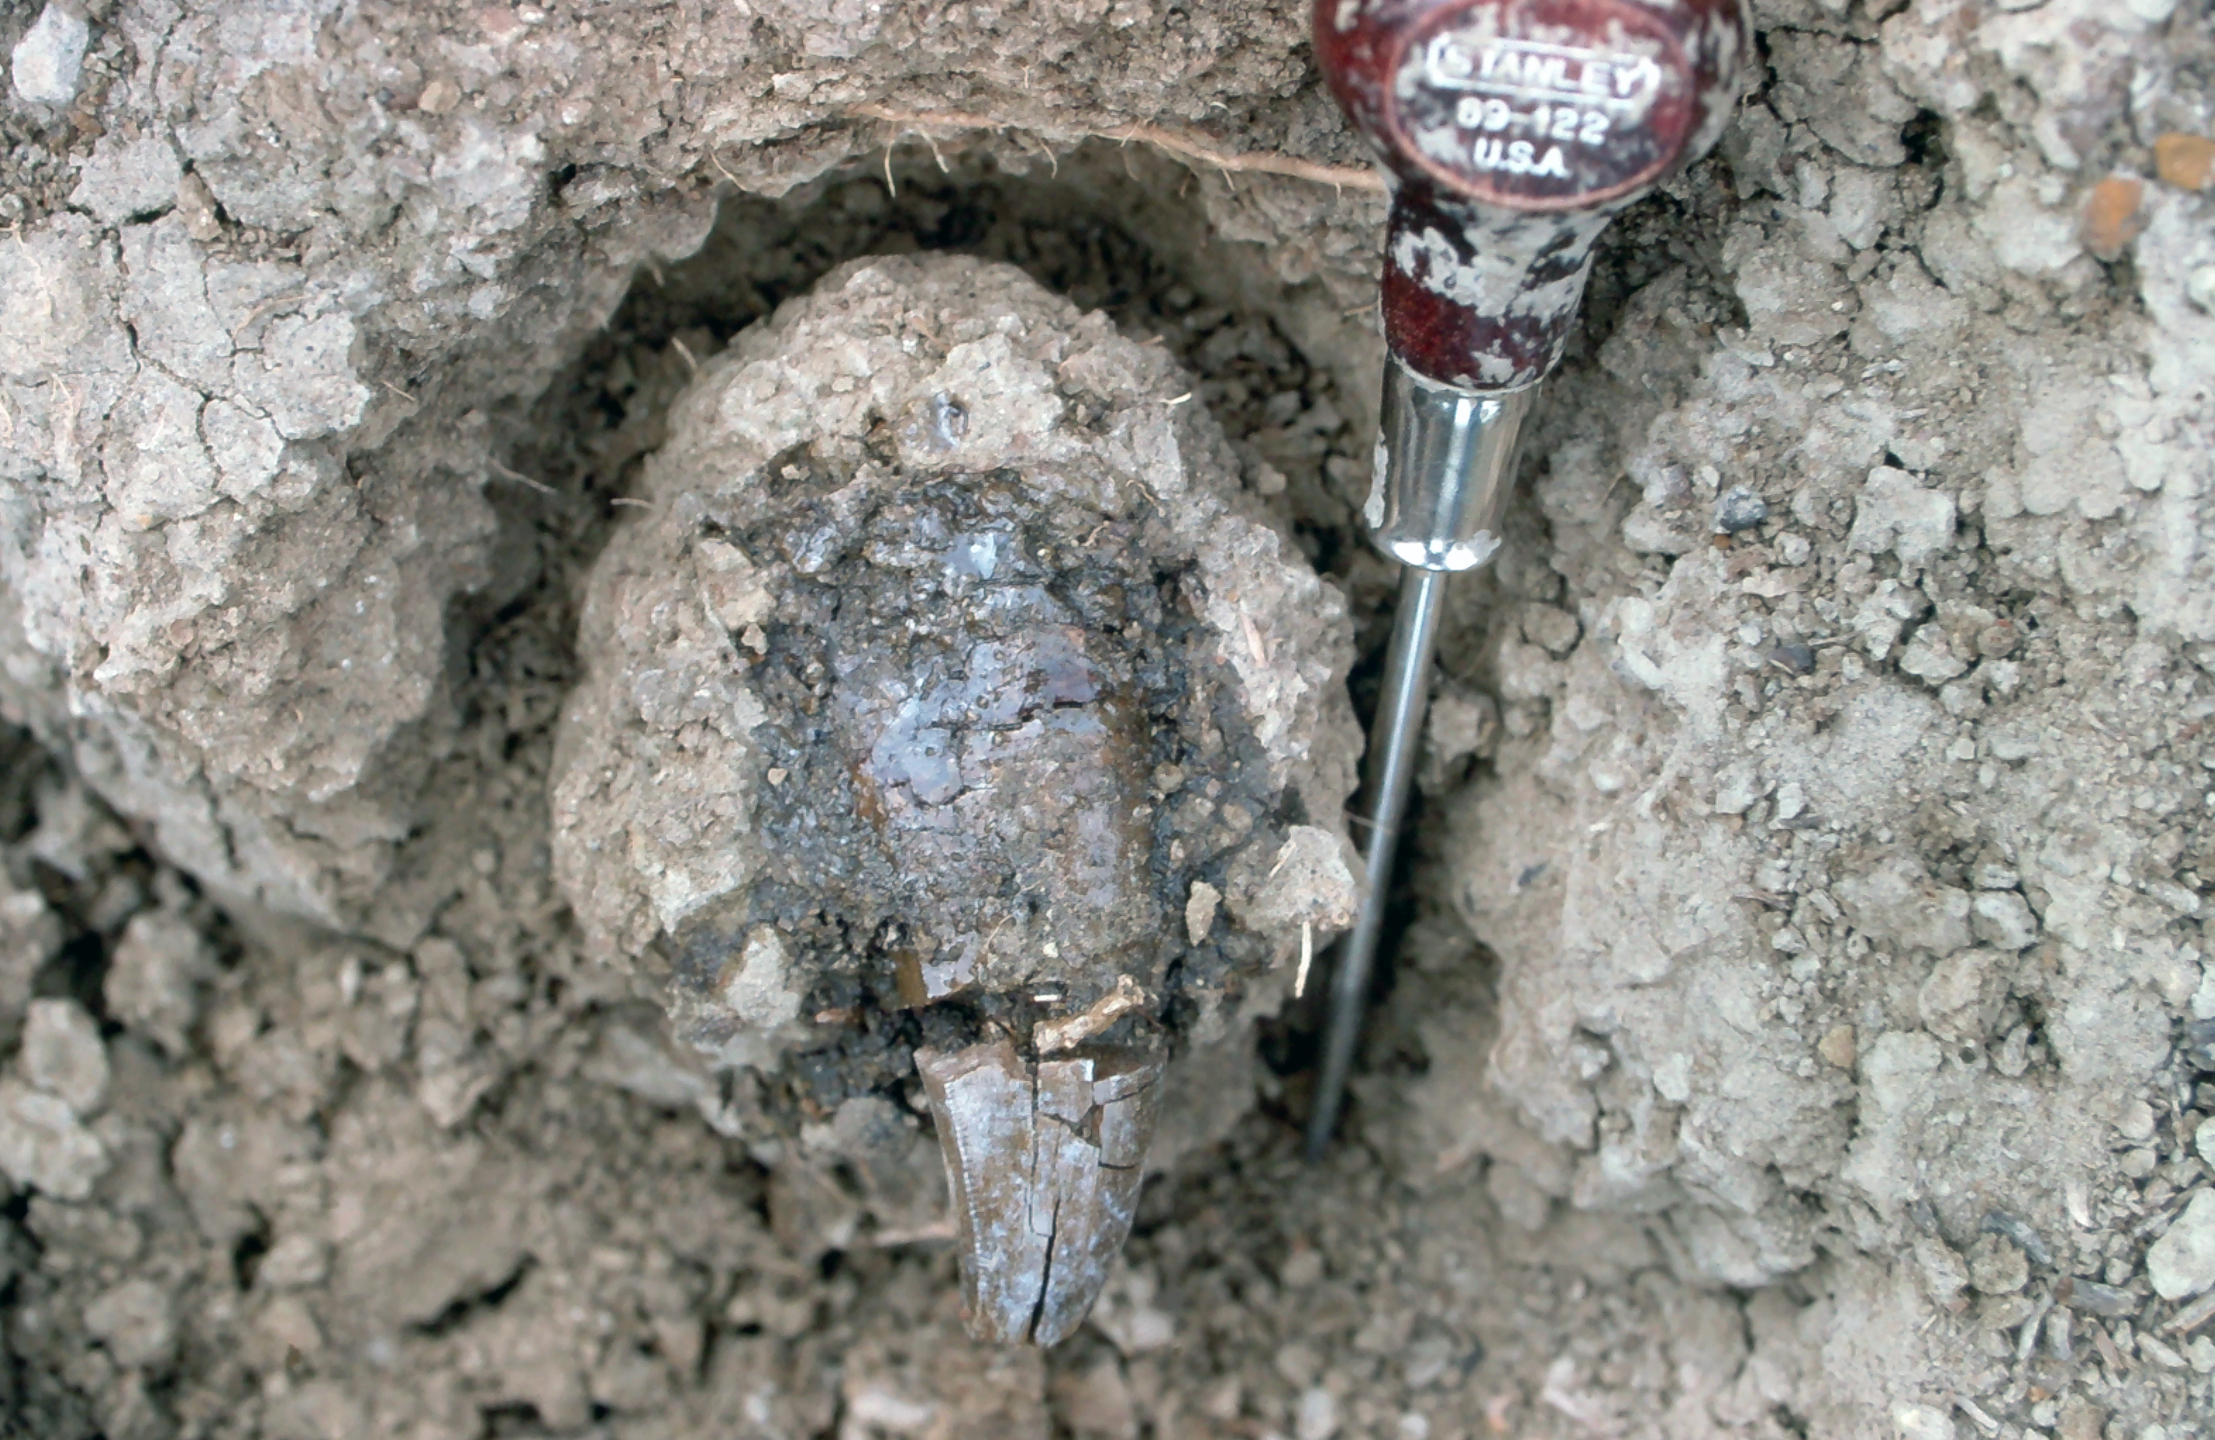 A tooth fossil exposed in the dirt.